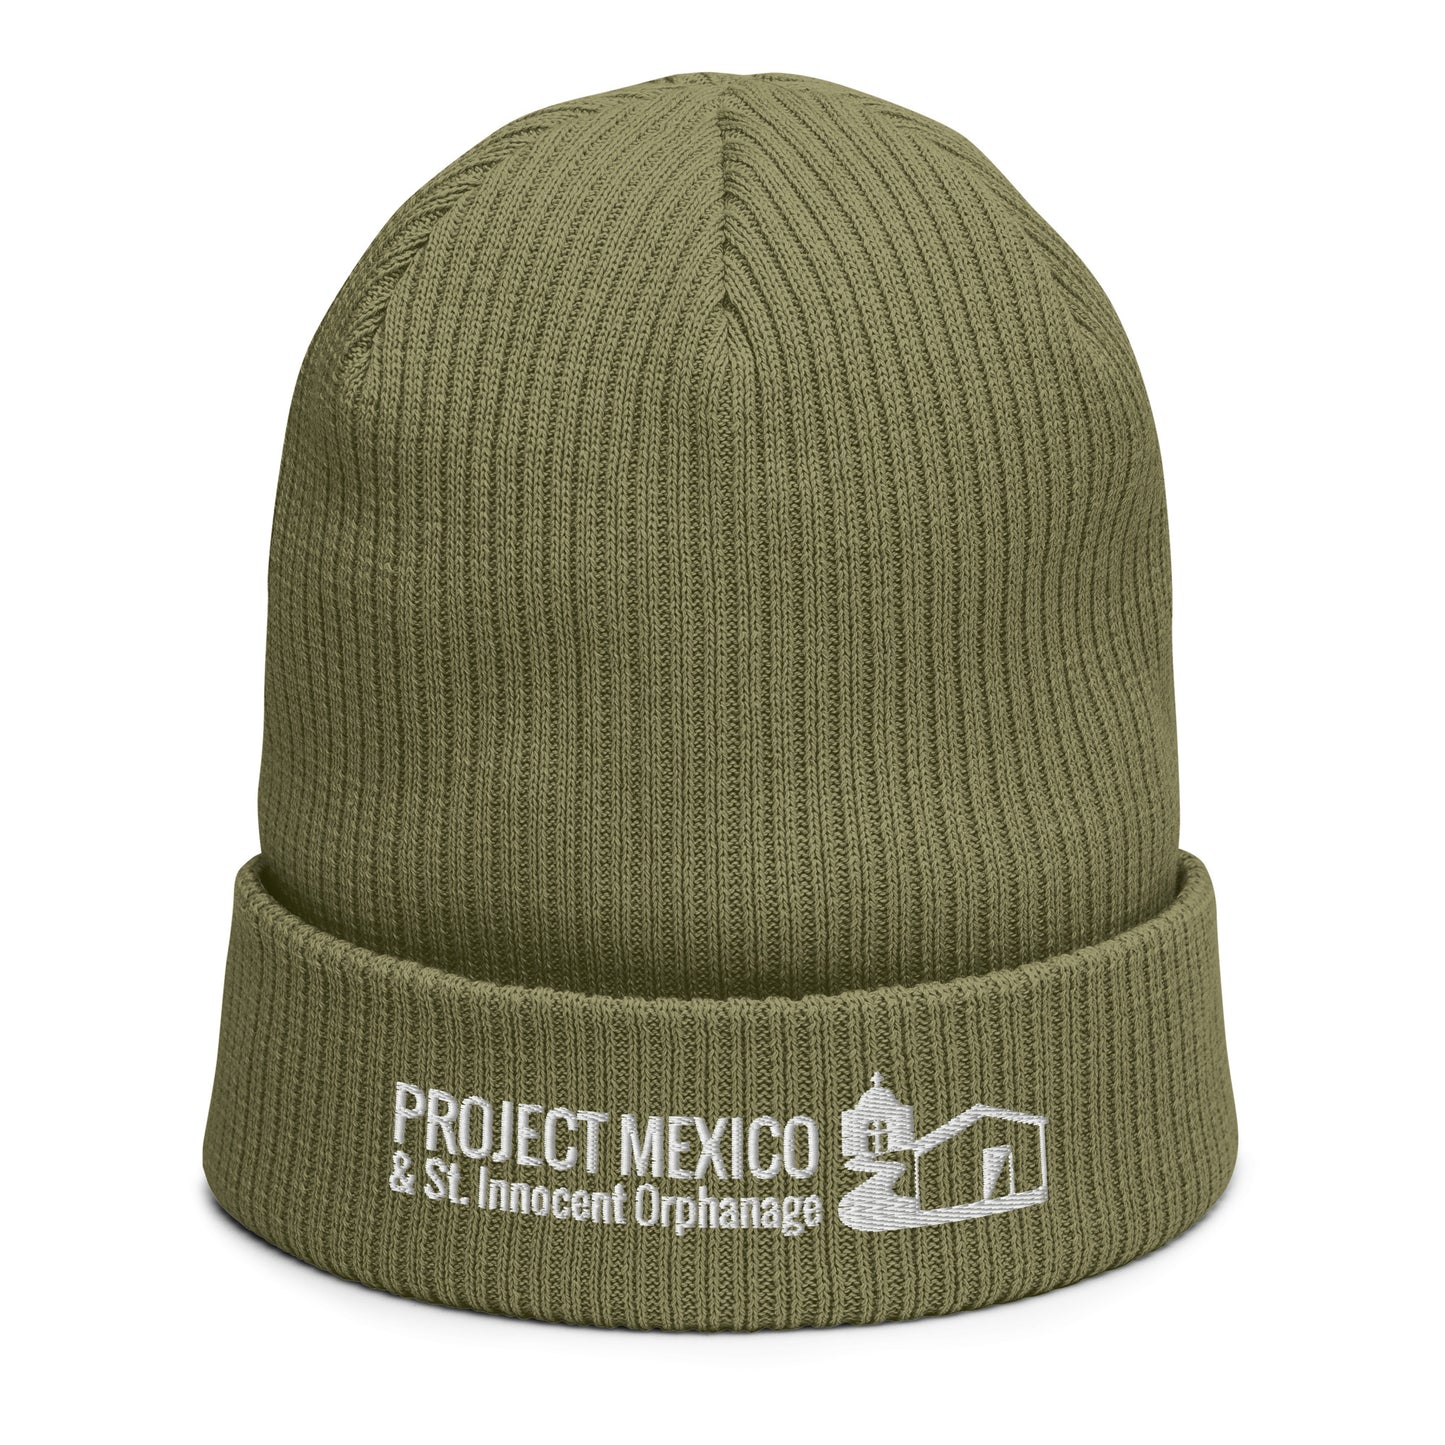 Project Mexico Organic ribbed beanie